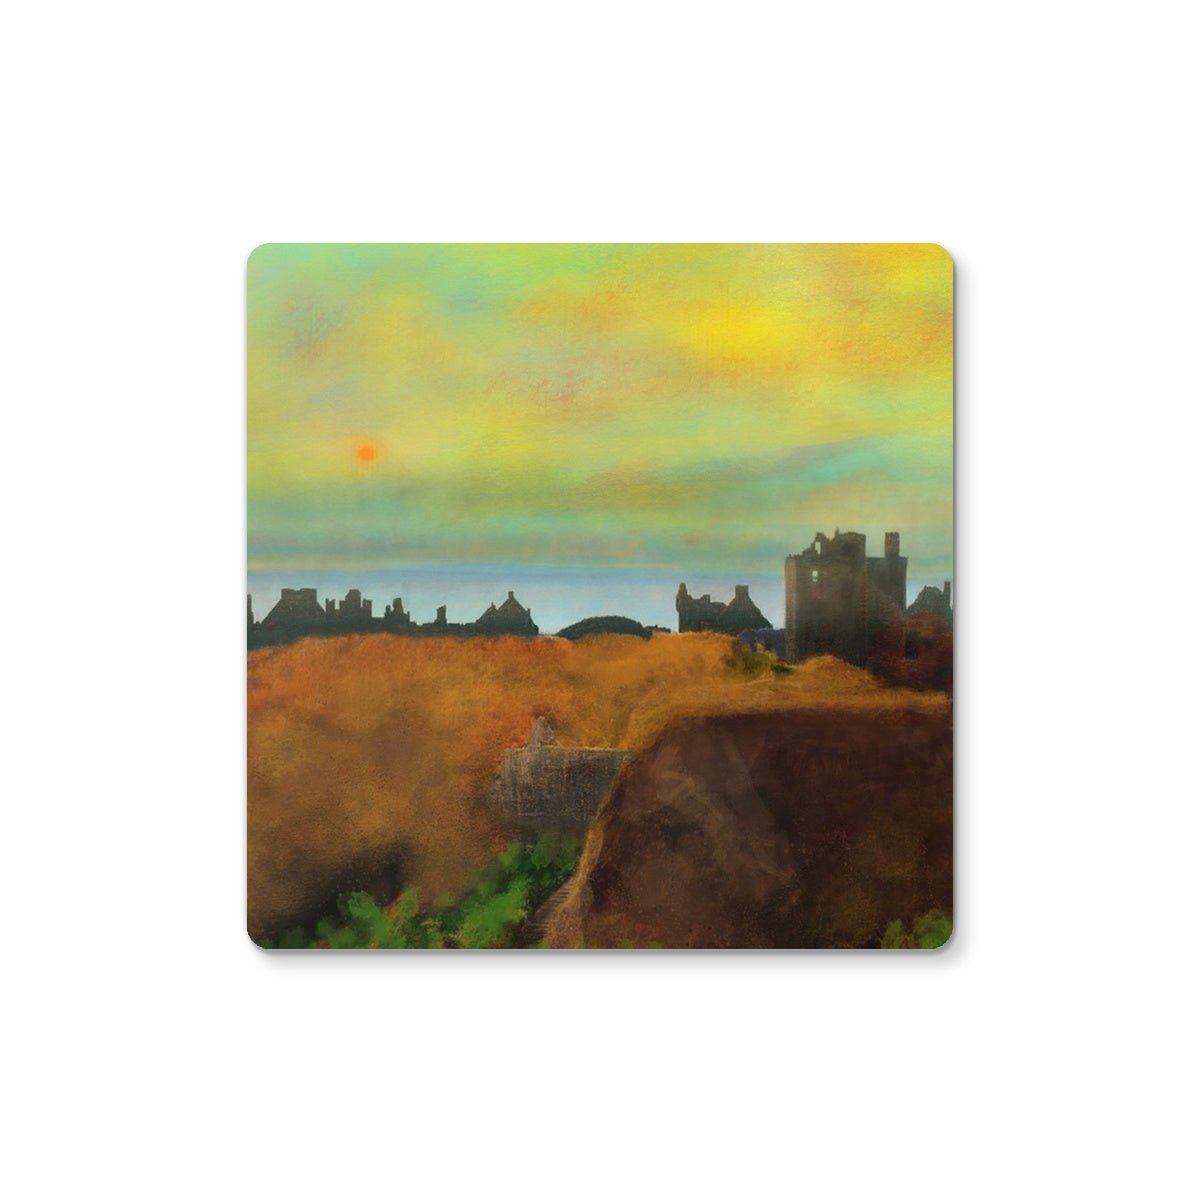 Dunnottar Castle Art Gifts Coaster-Coasters-Scottish Castles Art Gallery-4 Coasters-Paintings, Prints, Homeware, Art Gifts From Scotland By Scottish Artist Kevin Hunter